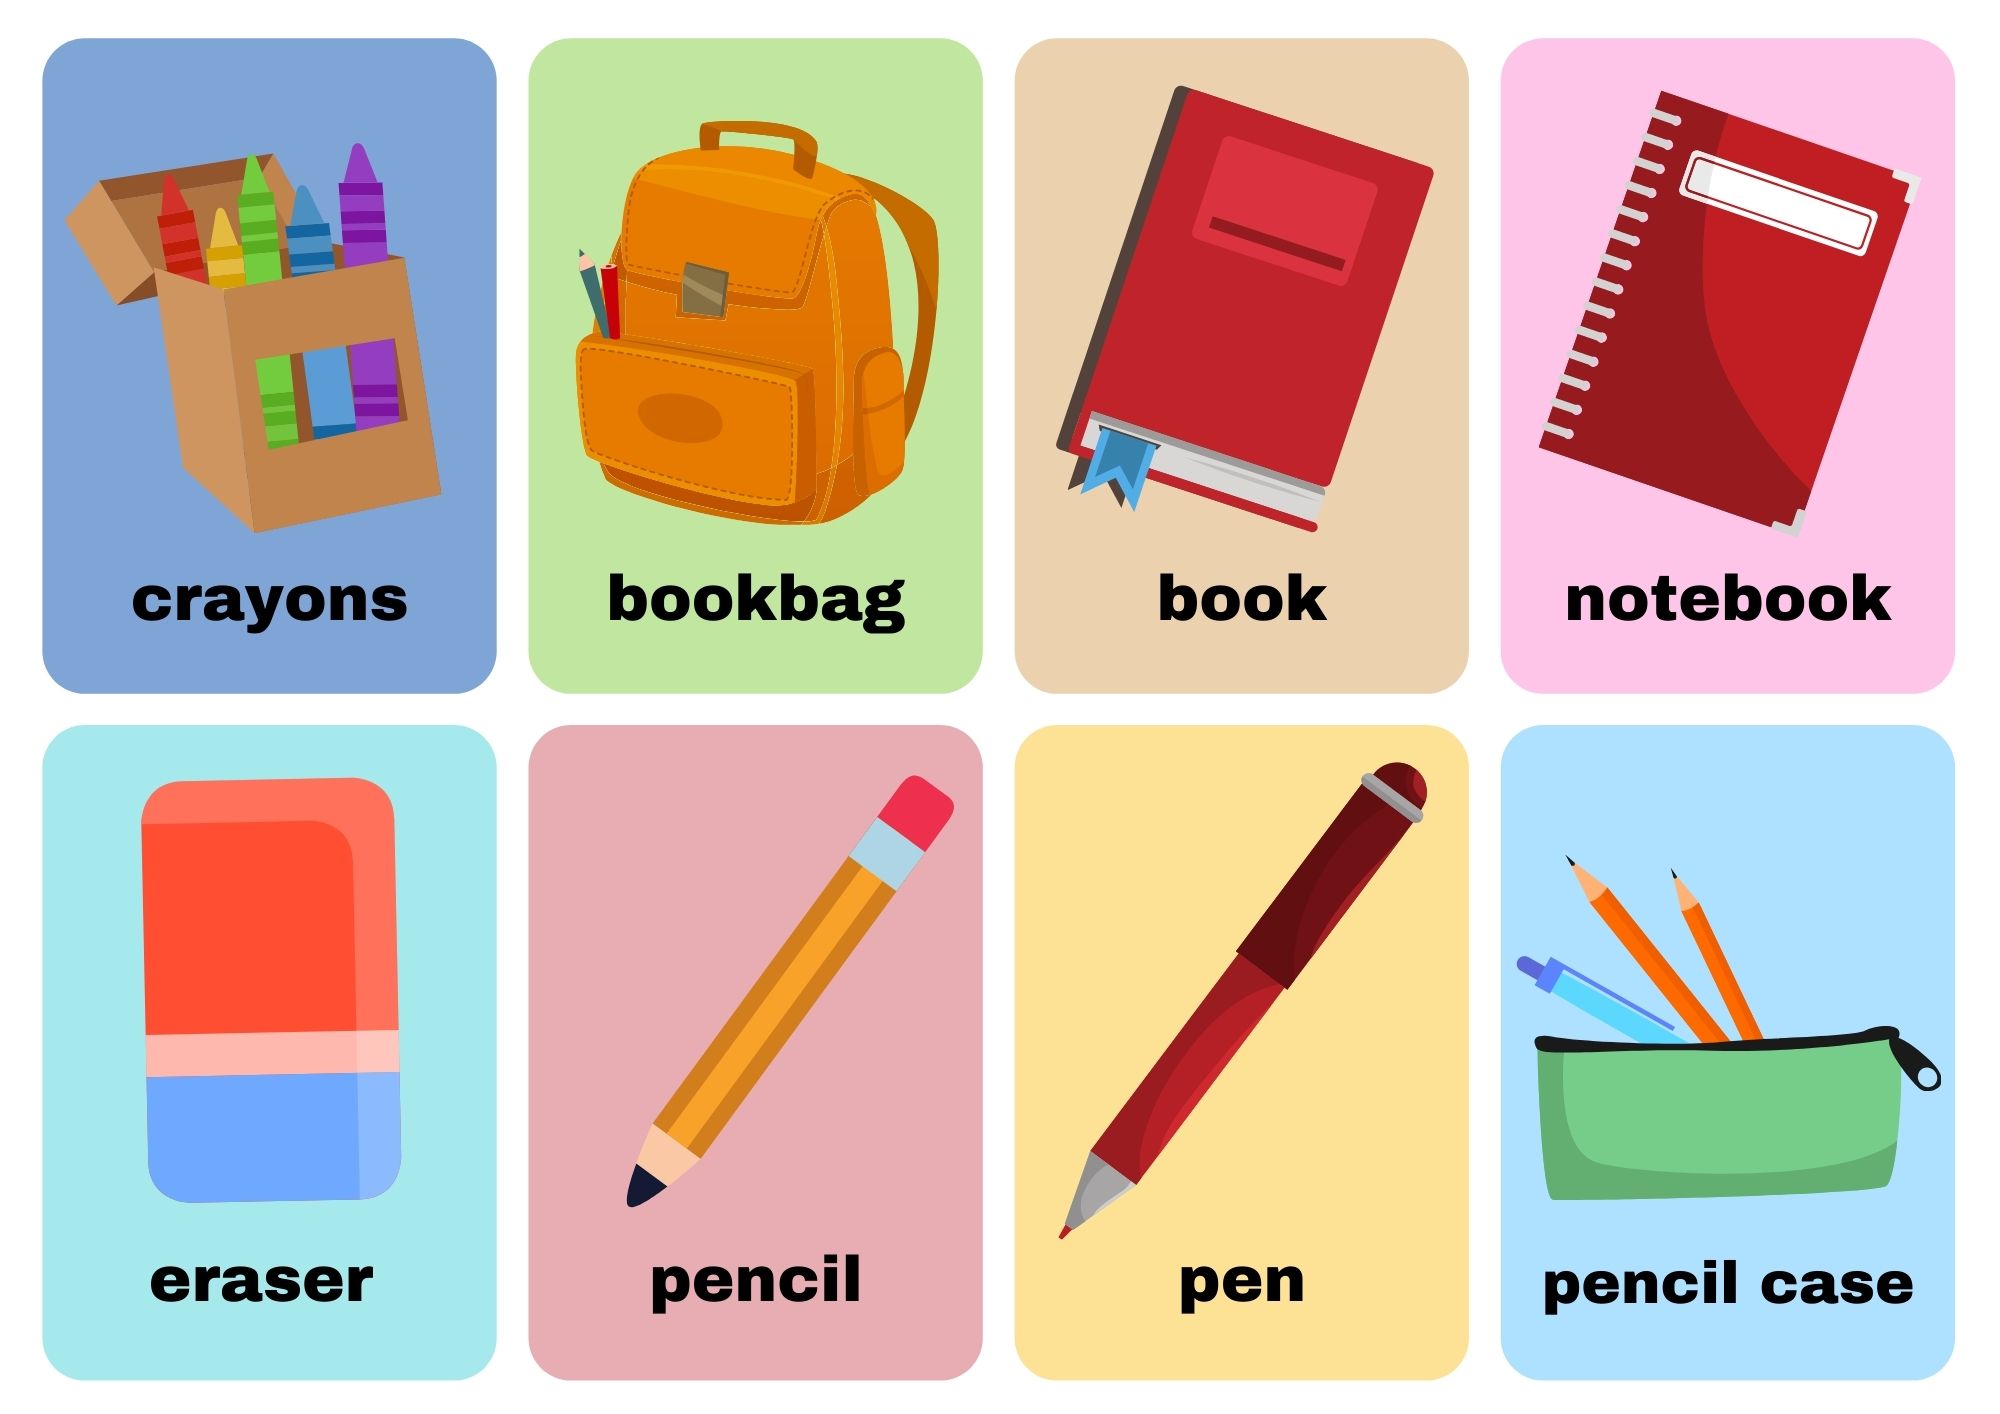 Classroom Objects Flashcards With Words